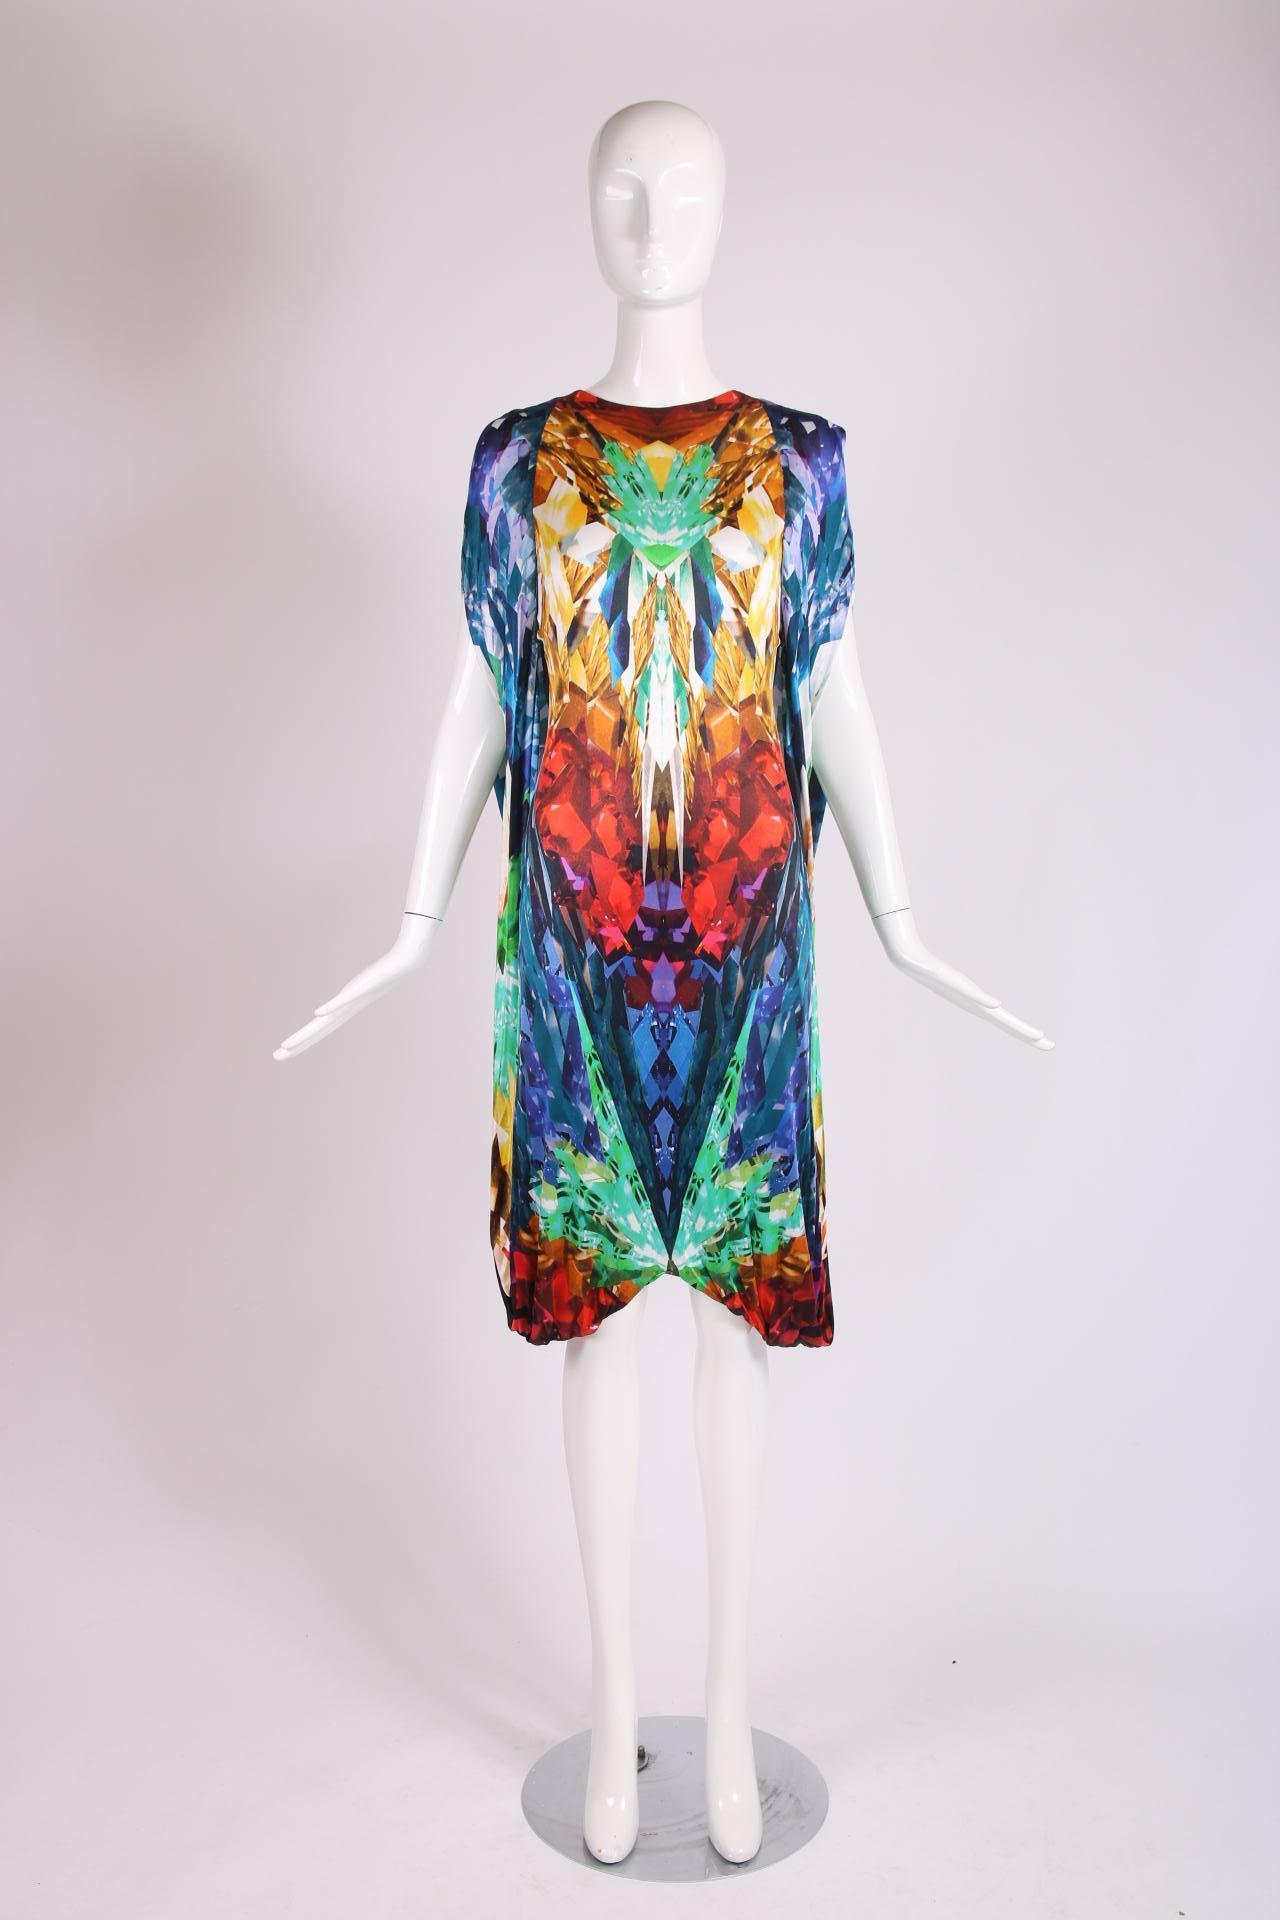 Alexander Mcqueen 2009 S/S crystal kaleidoscope print mini dress w/cape in rainbow colors from the iconic 